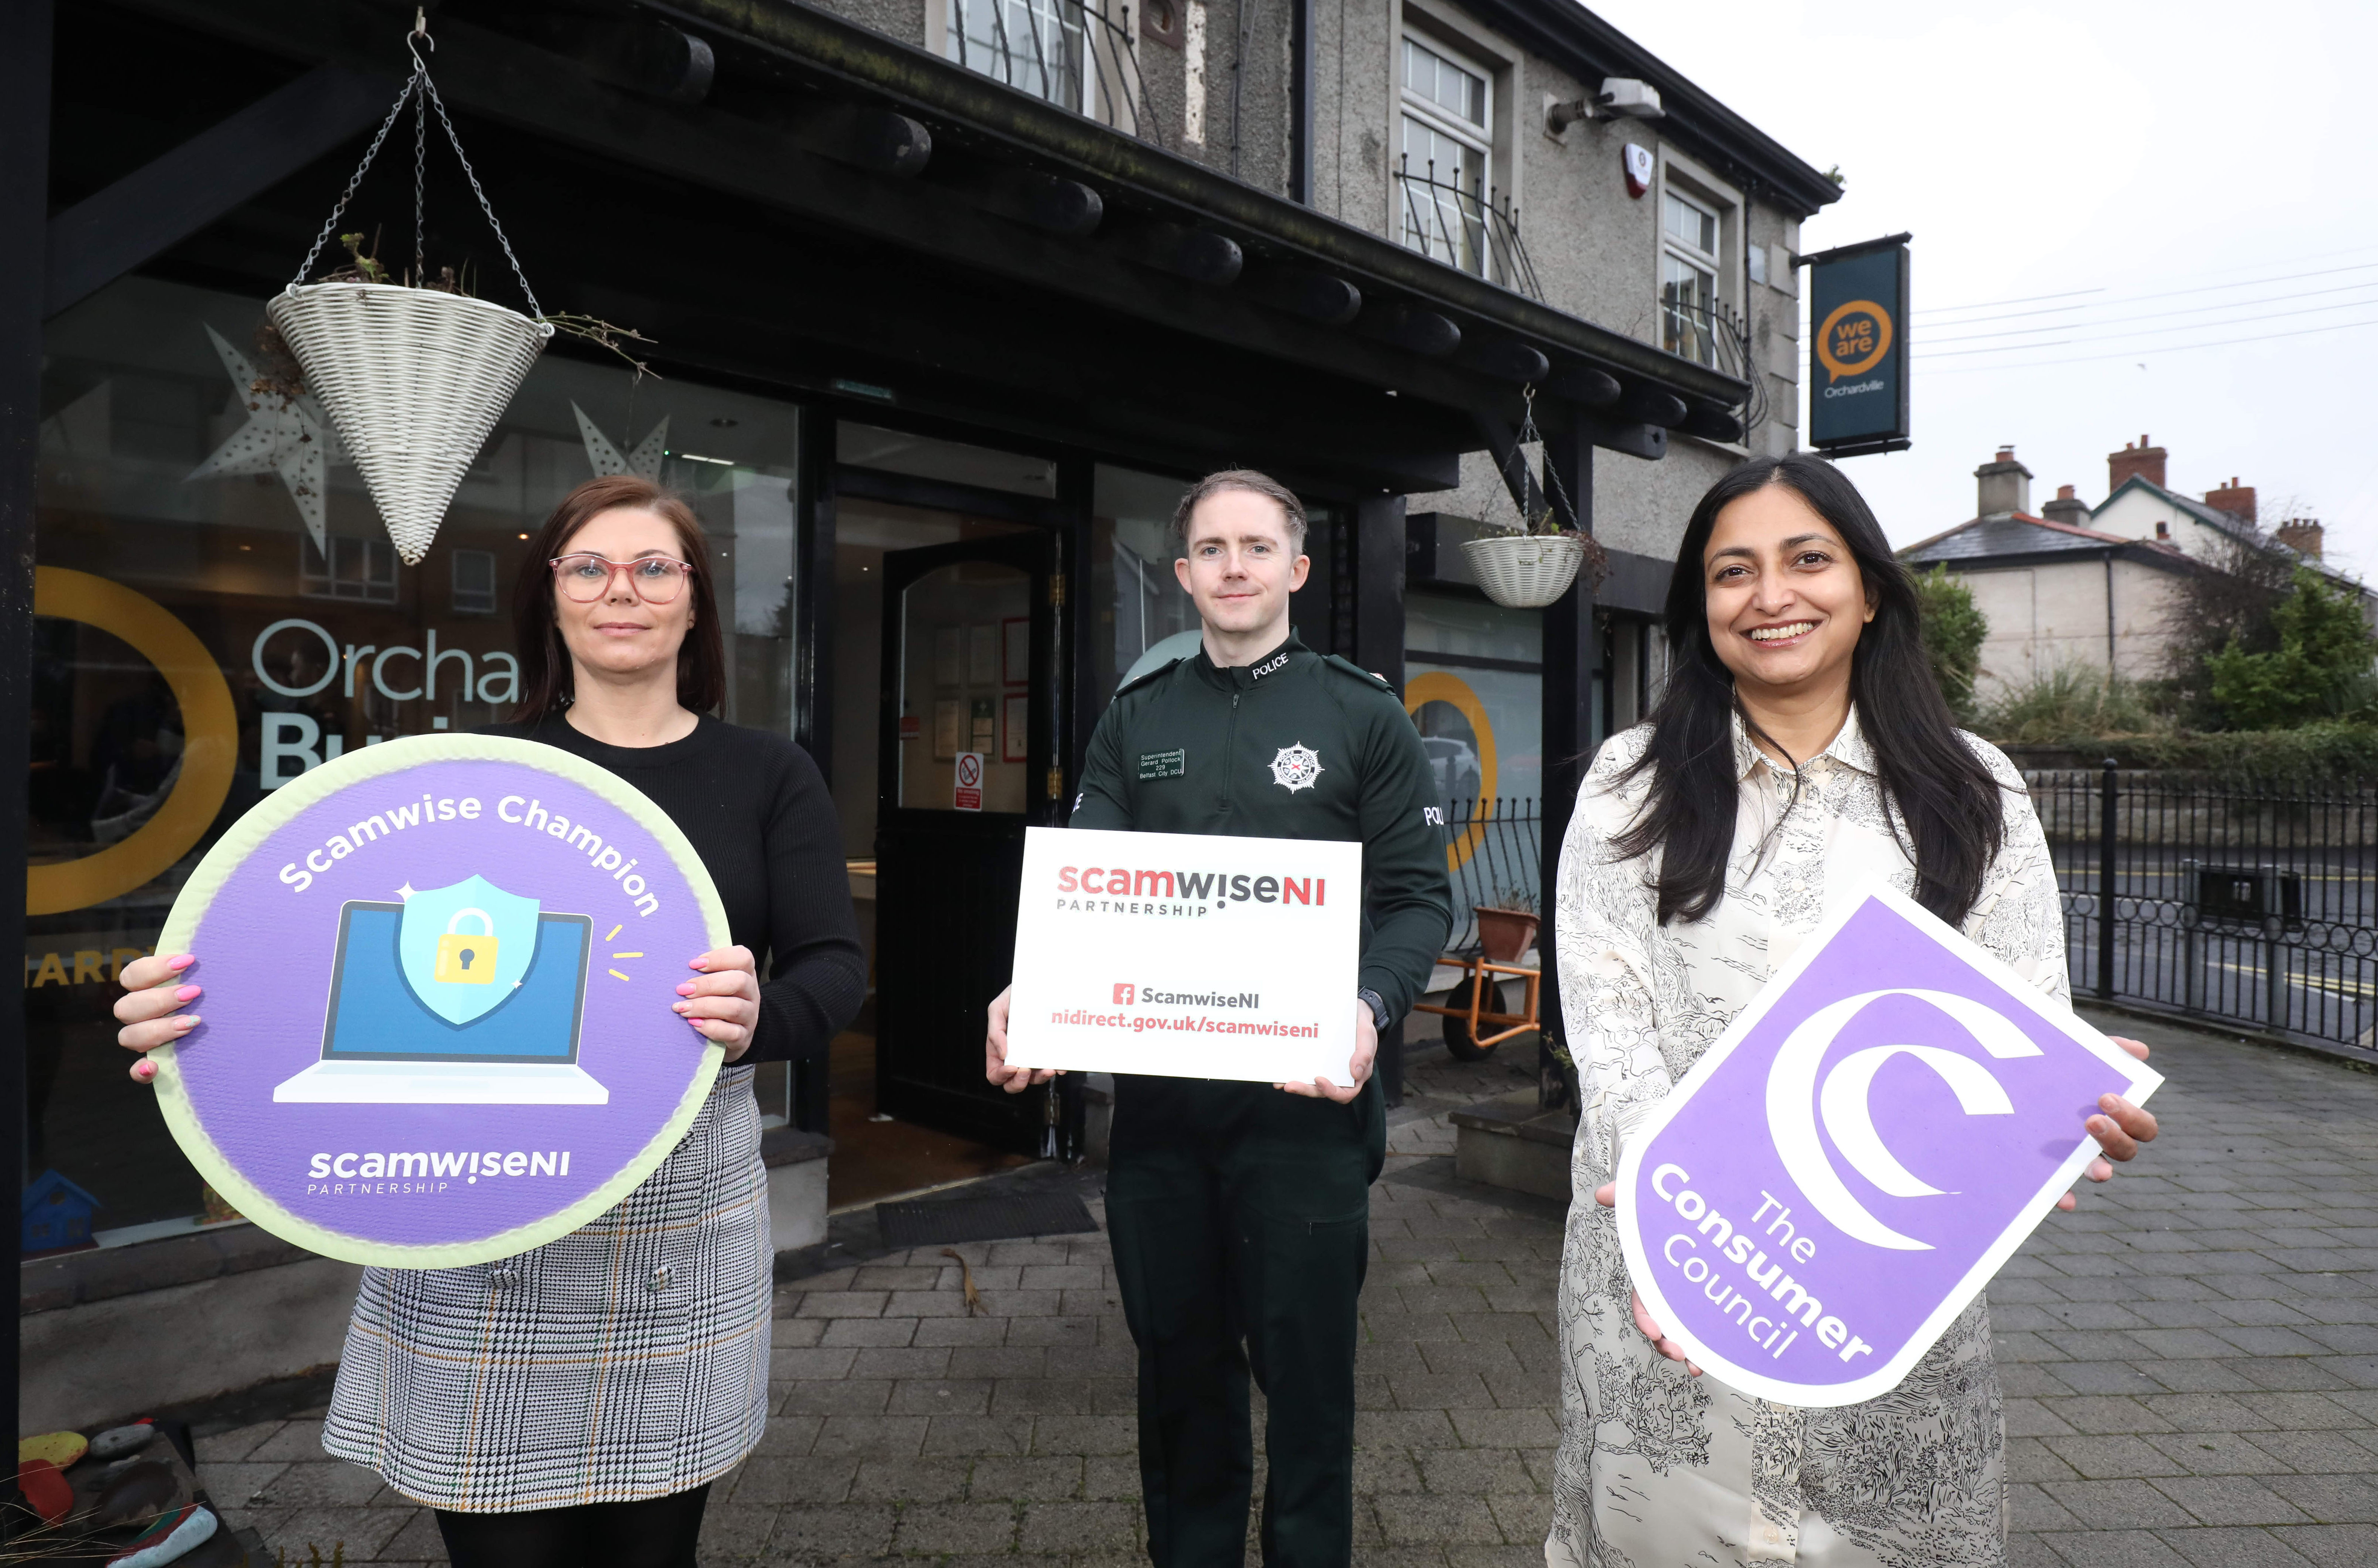 Superintendent Gerard Pollock (PSNI), Noyona Chundur (the Consumer Council) and Laura Jamison (Orchardville Society) officially launch the Scamwise Champion – Easy Read programme at the Orchadrville Society, Bangor. The programme has been designed to help people with learning difficulties to stay safe from scams. 